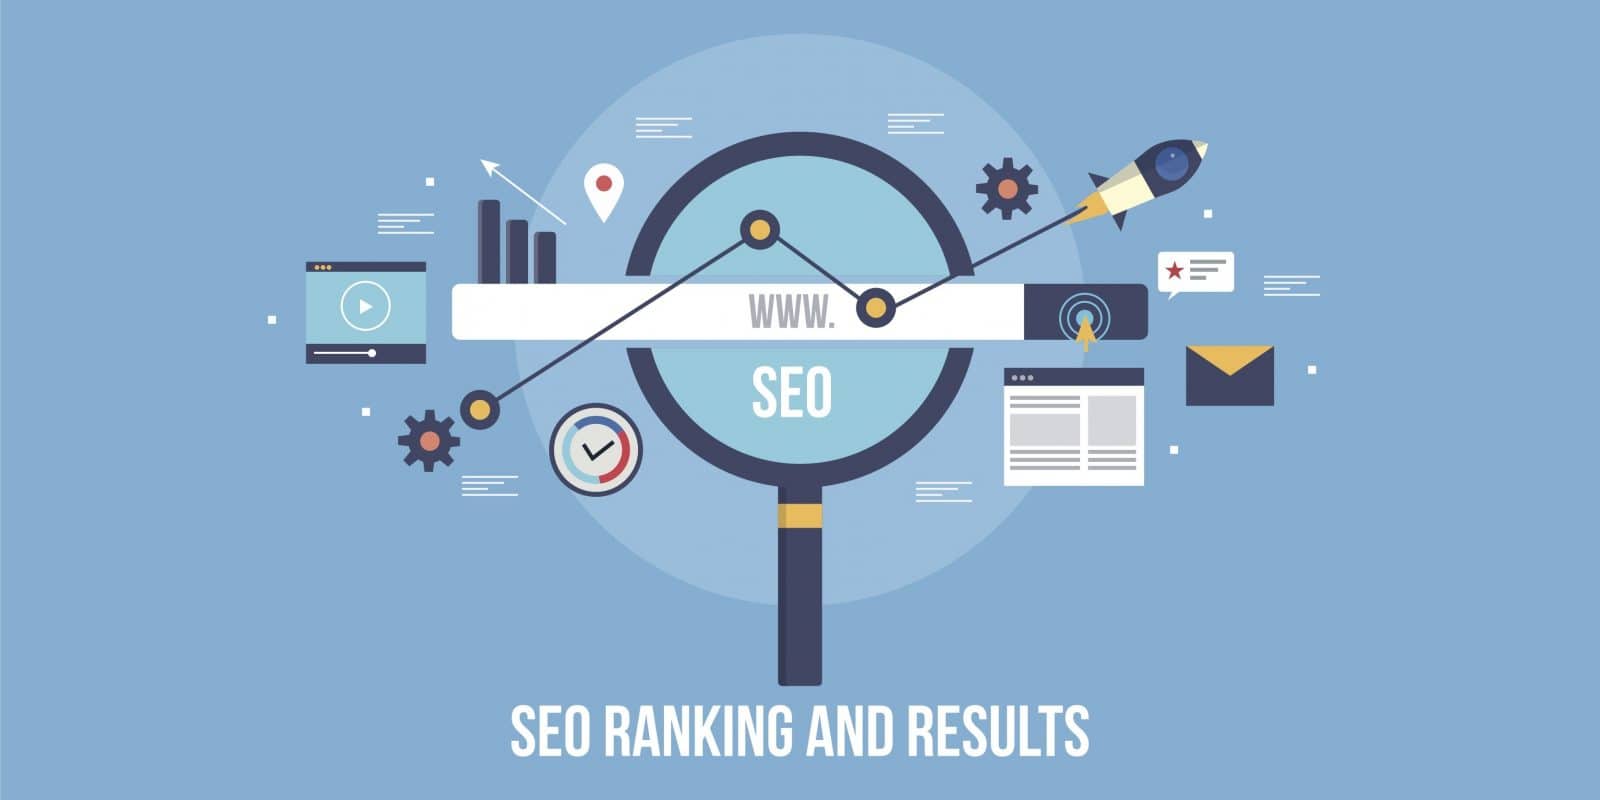 3 Off-page Factors Affecting SEO Ranking